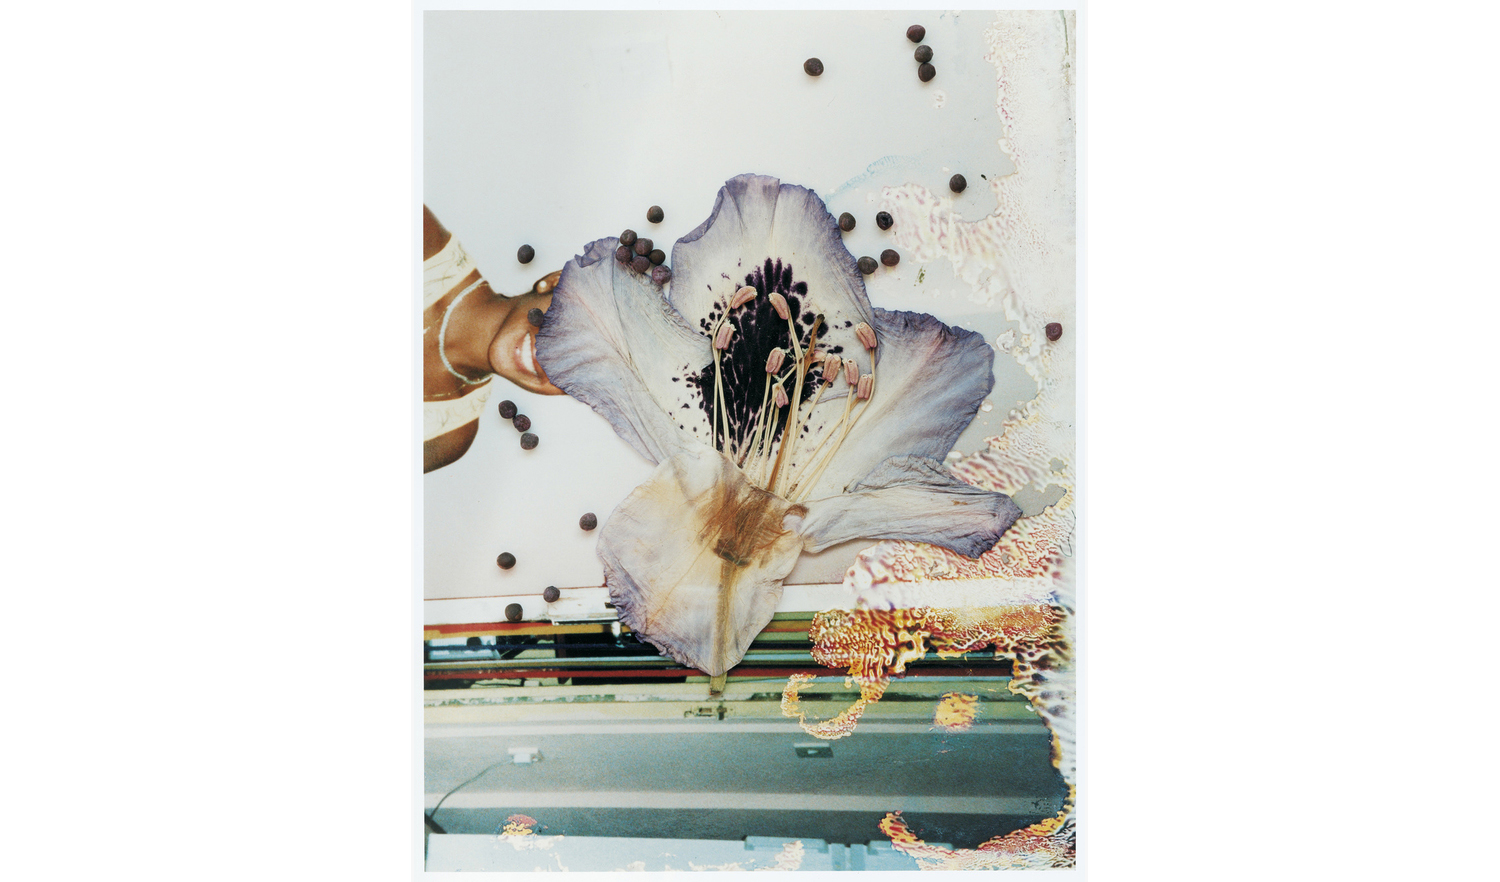 "Untitled" from the series Hackney Flowers, 2005 - 2007